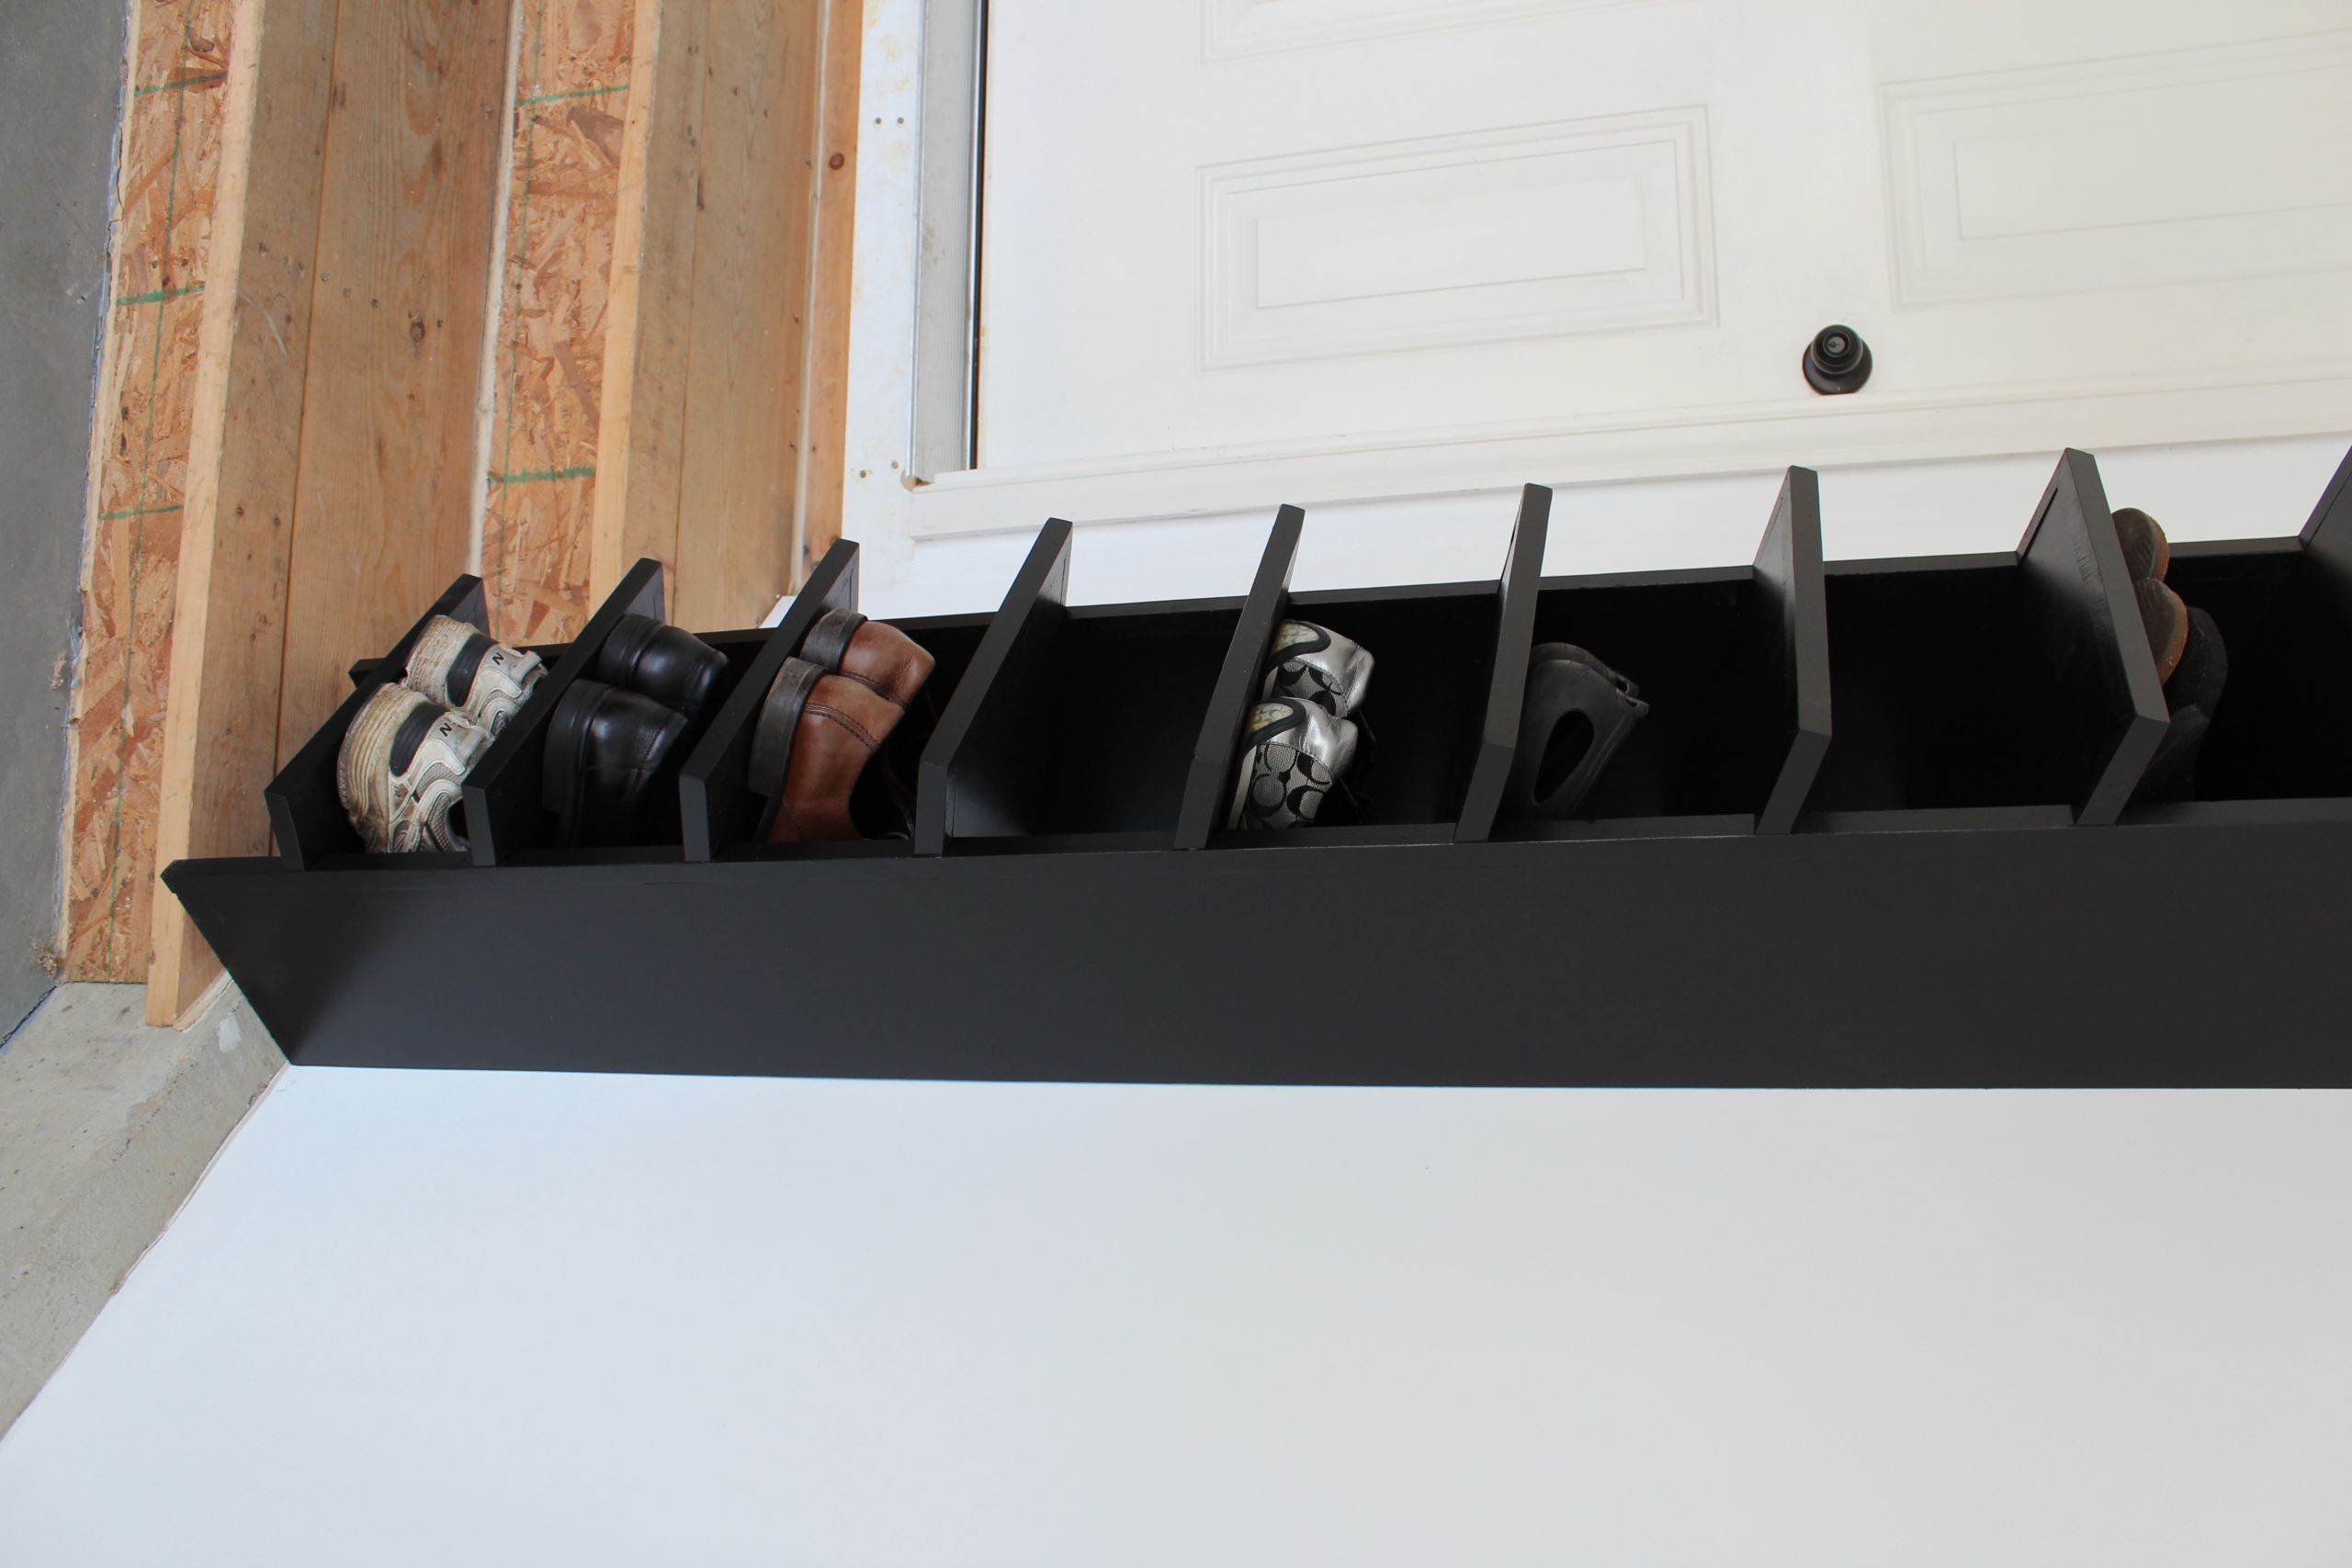 Garage Shoe Organizer
 Our Home From Scratch